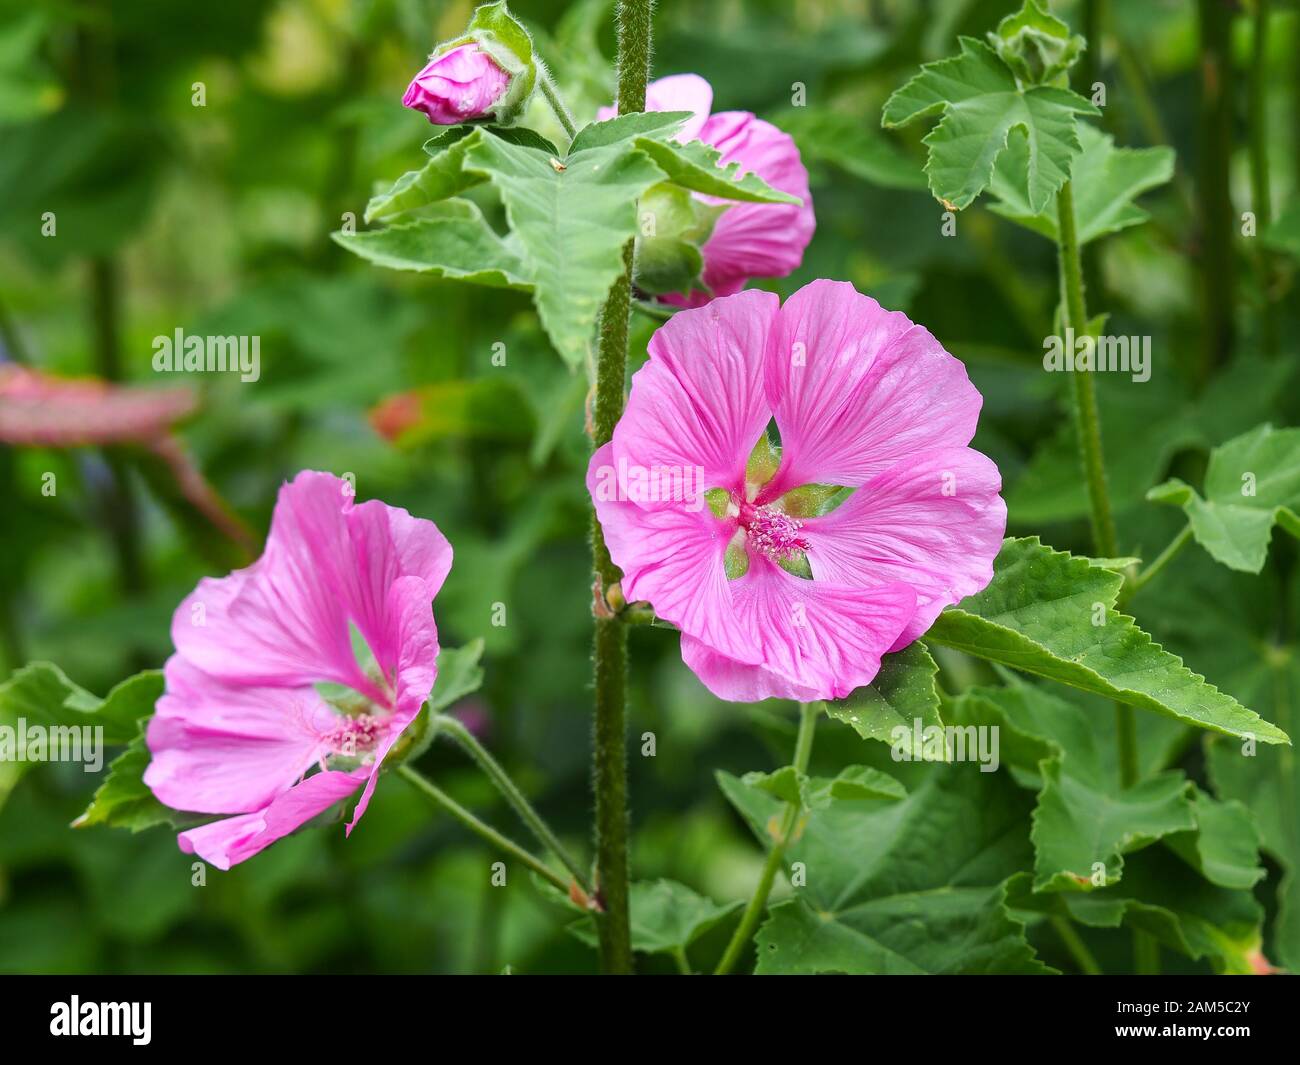 Pretty pink flowers of the tree mallow plant, Lavatera thuringiaca, in a summer garden Stock Photo